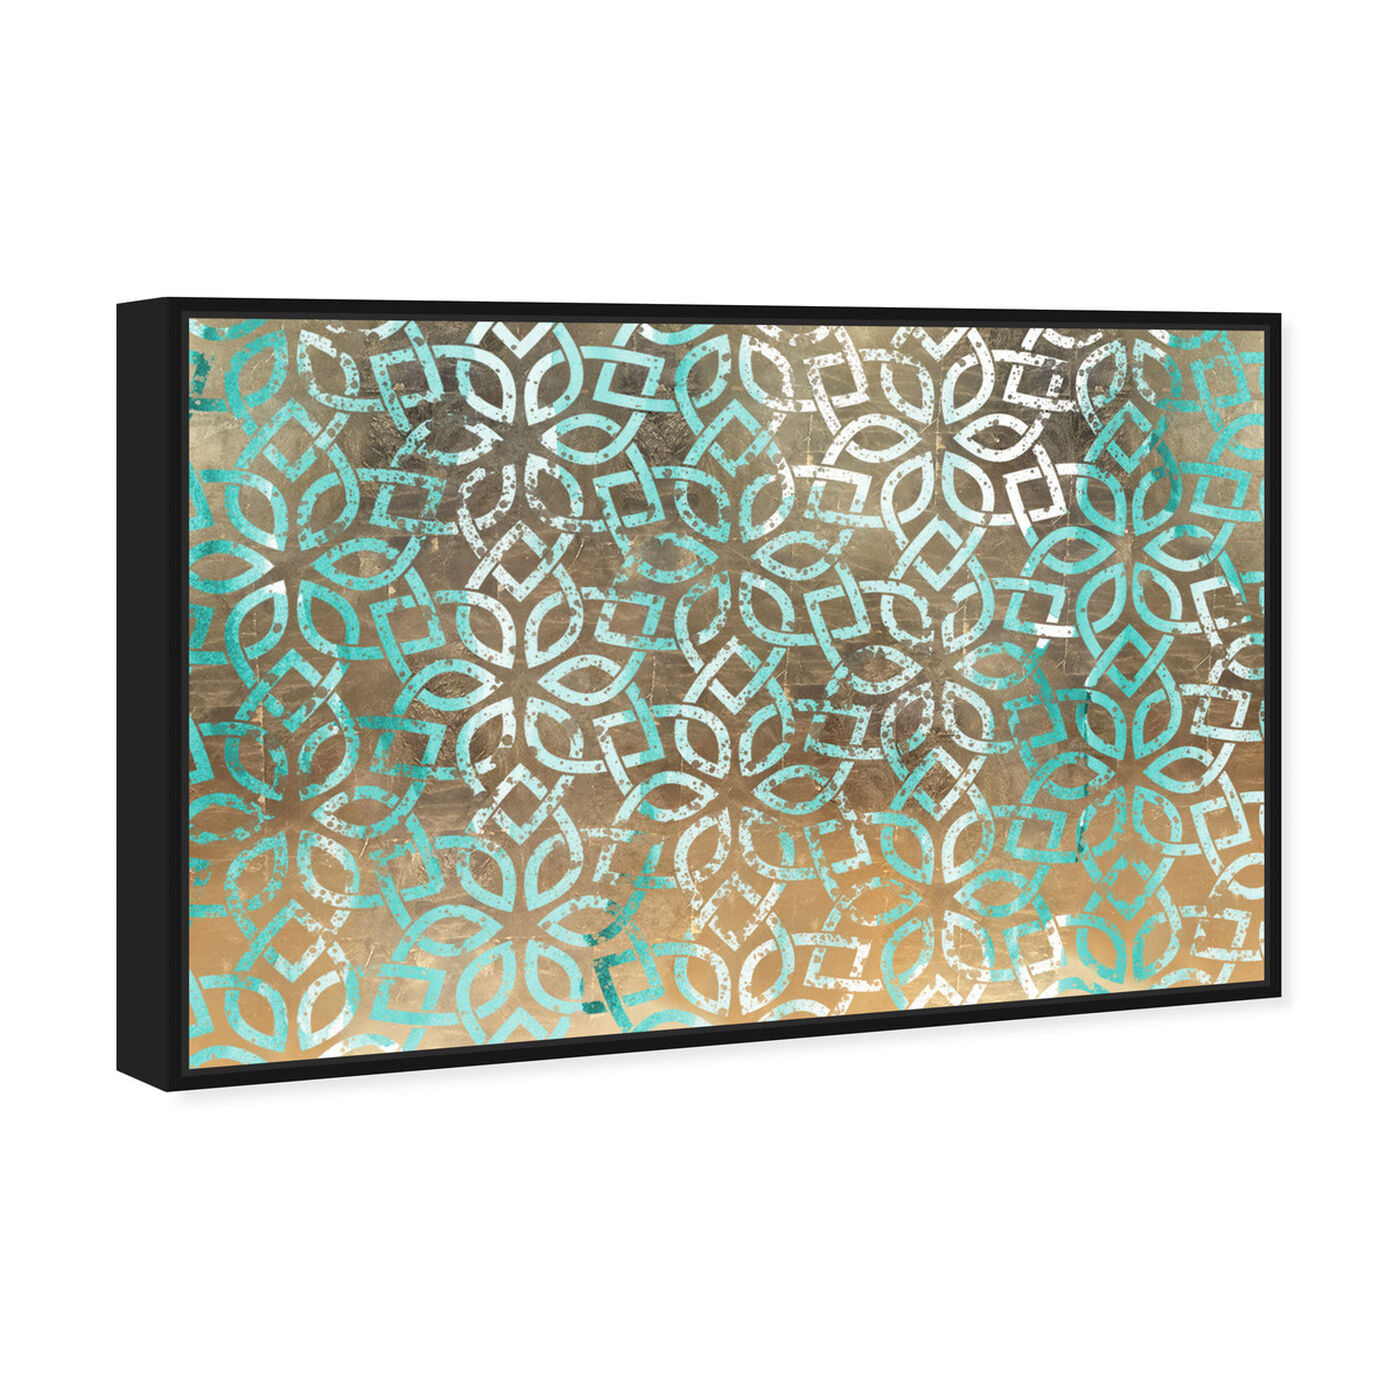 Angled view of Regal Jade Lattice featuring abstract and patterns art.